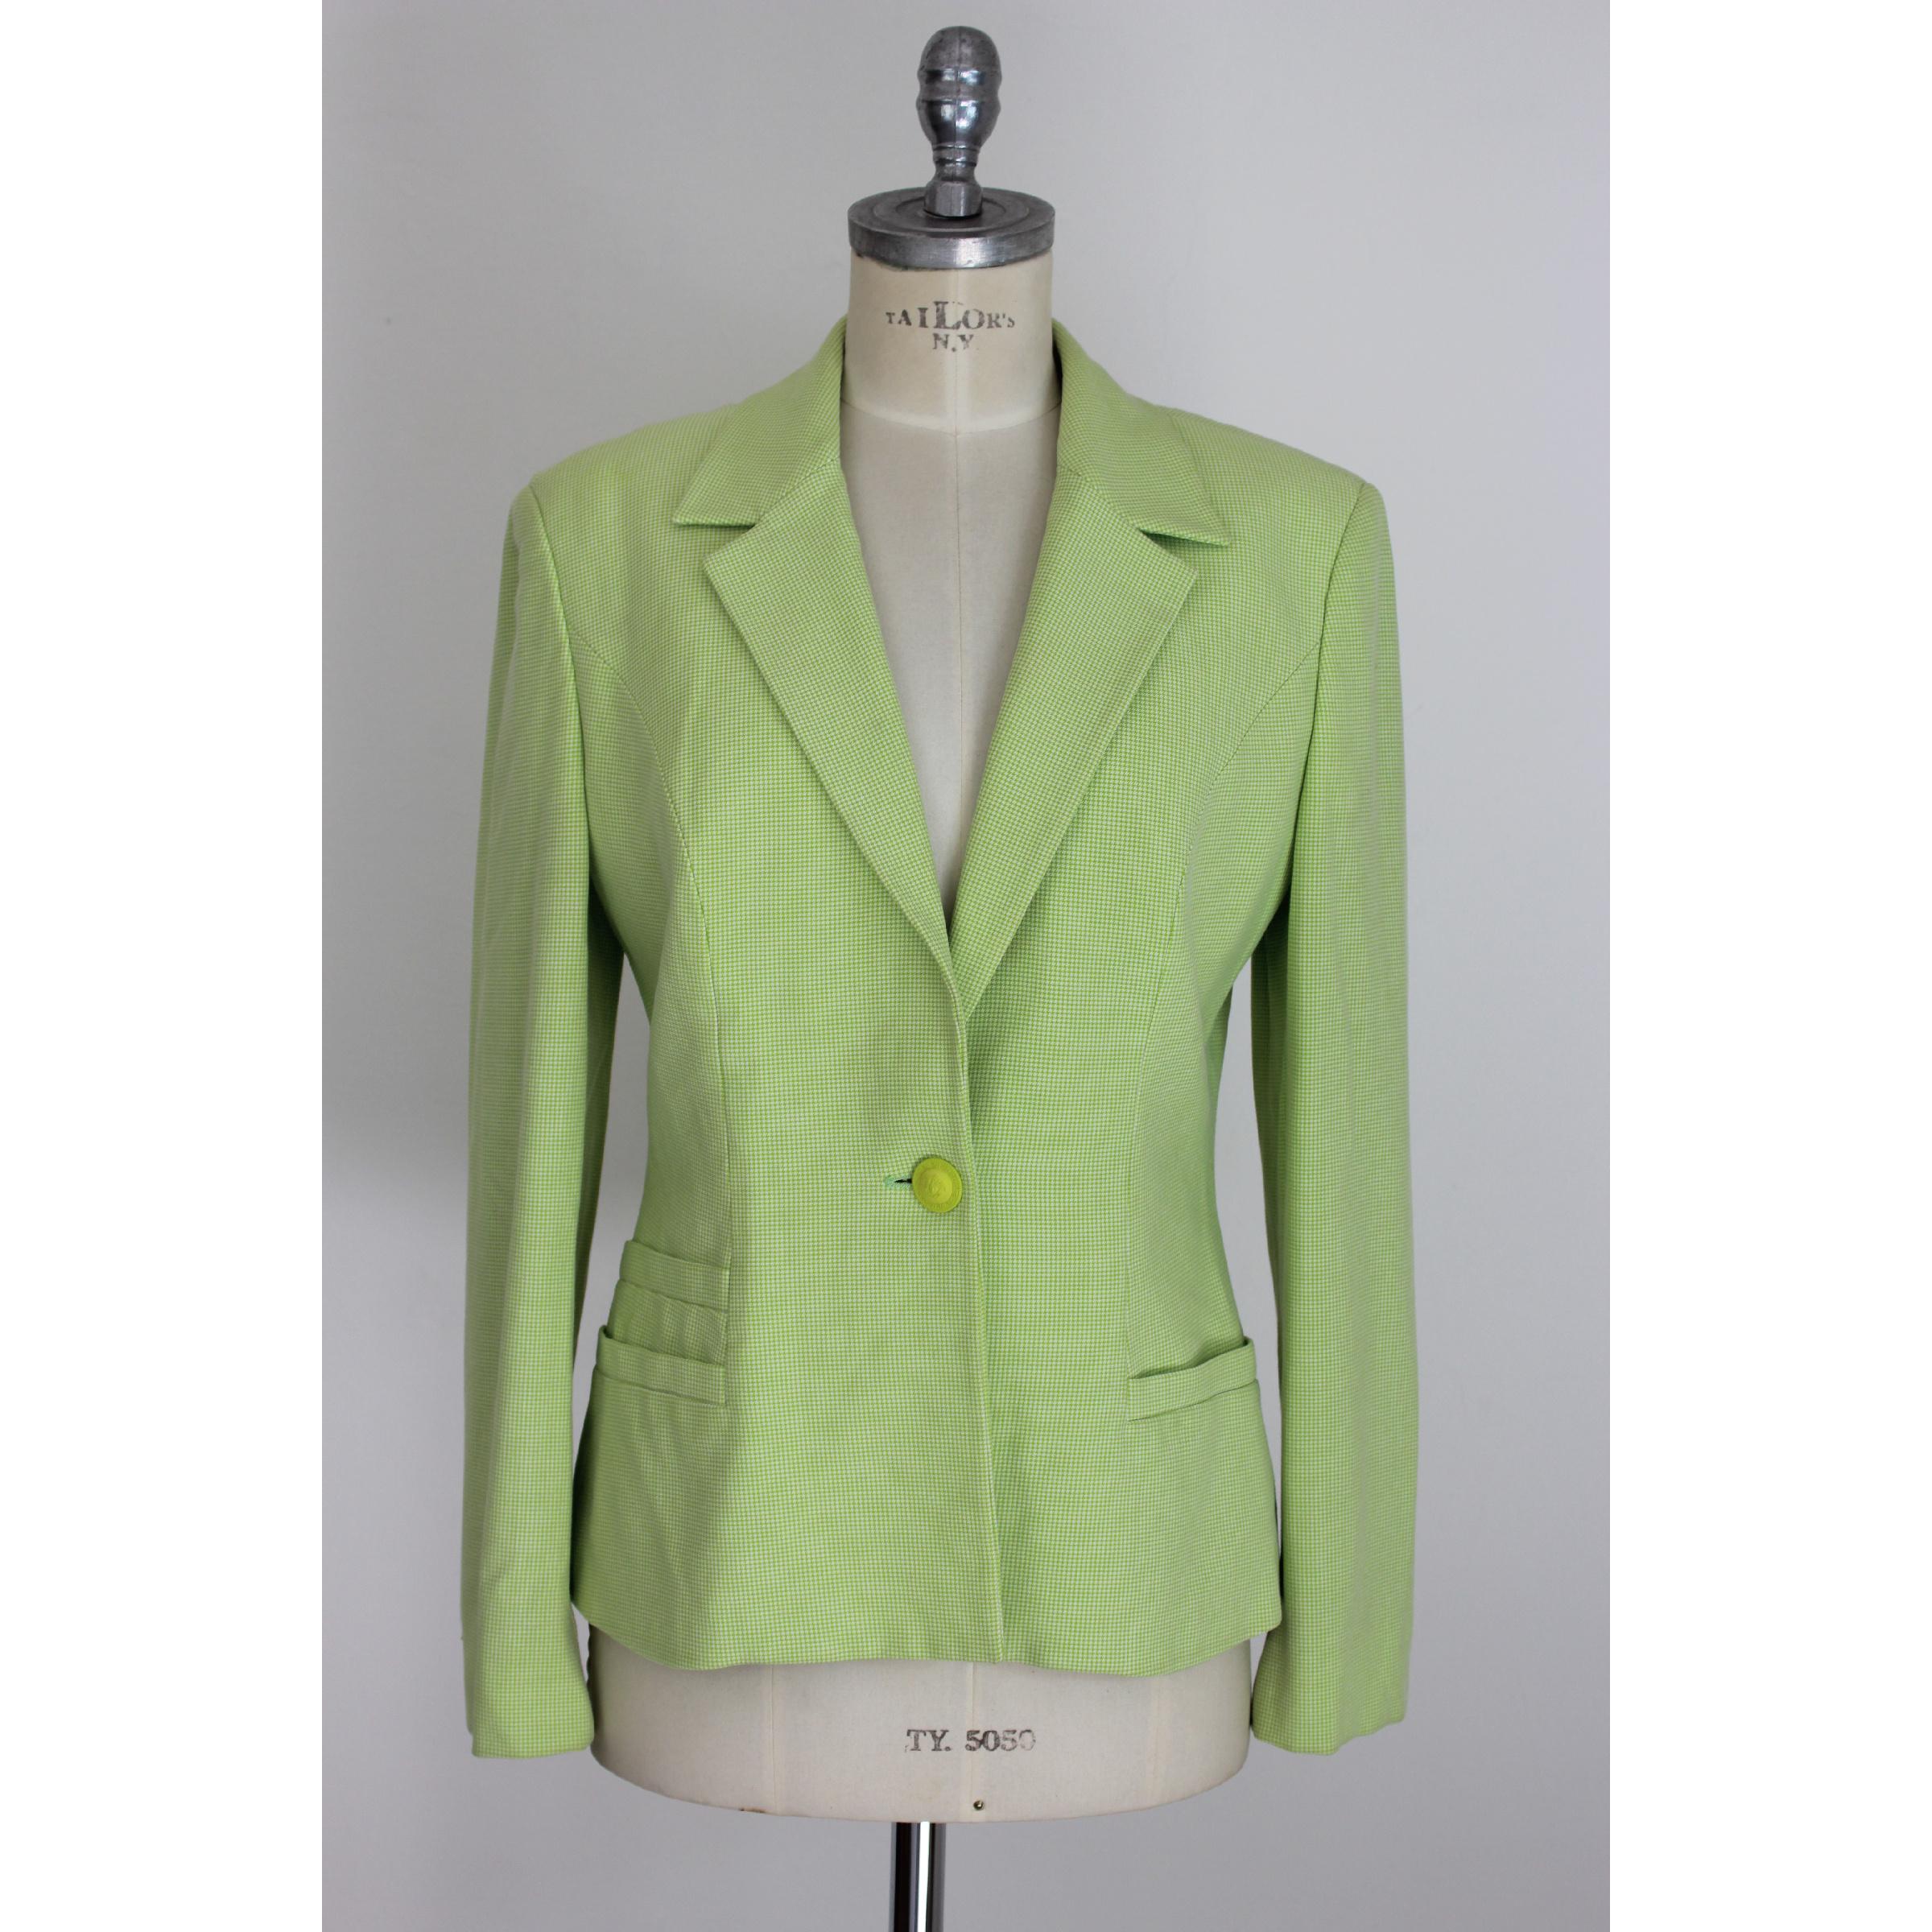 Gianni Versace Couture pied de poule vintage green jacket, made in Italy. Closure with a single button with a jellyfish head. Composition 65% viscose, 30% polyamide and 5% elastene. Two front pockets, flared model, 1990s, excellent vintage